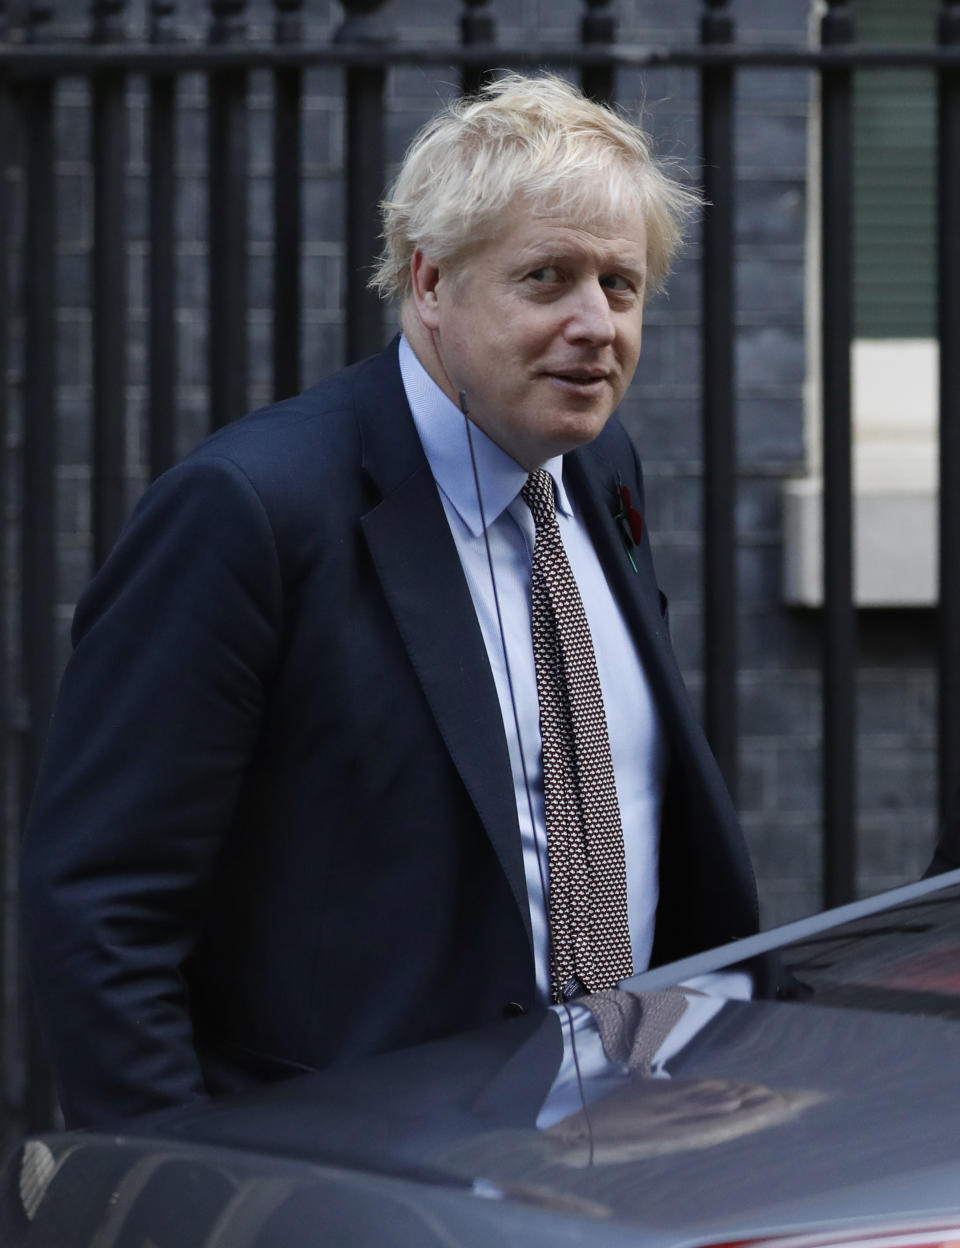 Britain's Prime Minister Boris Johnson leaves 10 Downing Street on route to Buckingham Palace ahead of an audience with Queen Elizabeth II and the formal start of the General Election, in London, Wednesday, Nov. 6, 2019. Britain goes to the polls on Dec.12. (AP Photo/Alastair Grant)